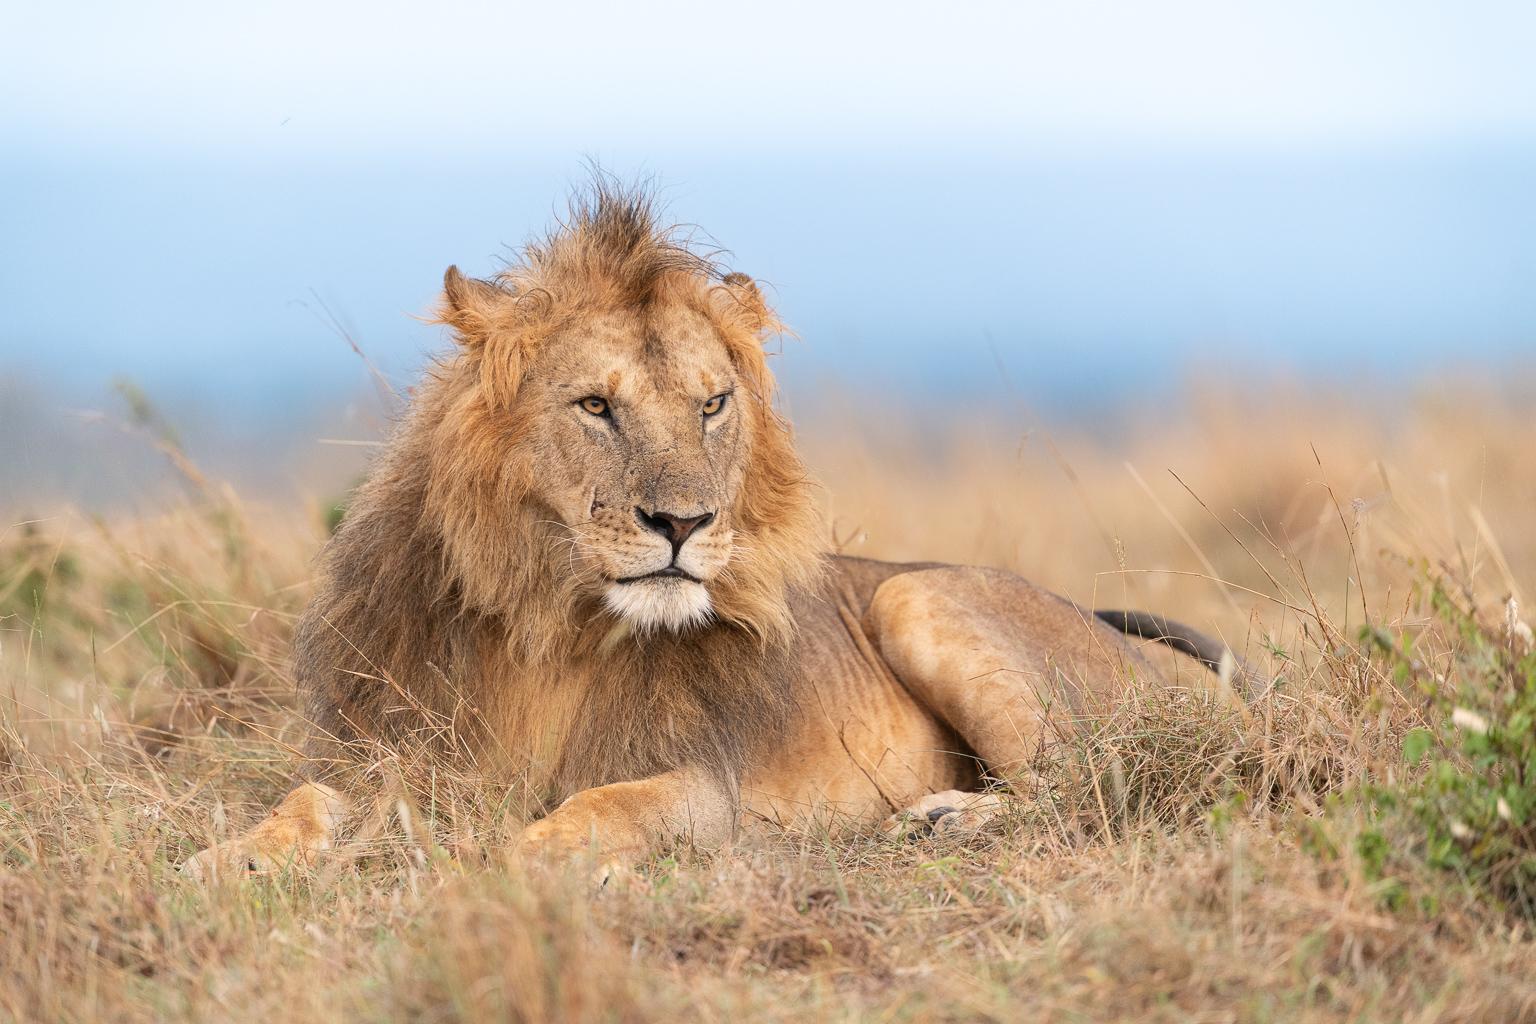 Lion sitting in golden grass with blue out of focus sky background